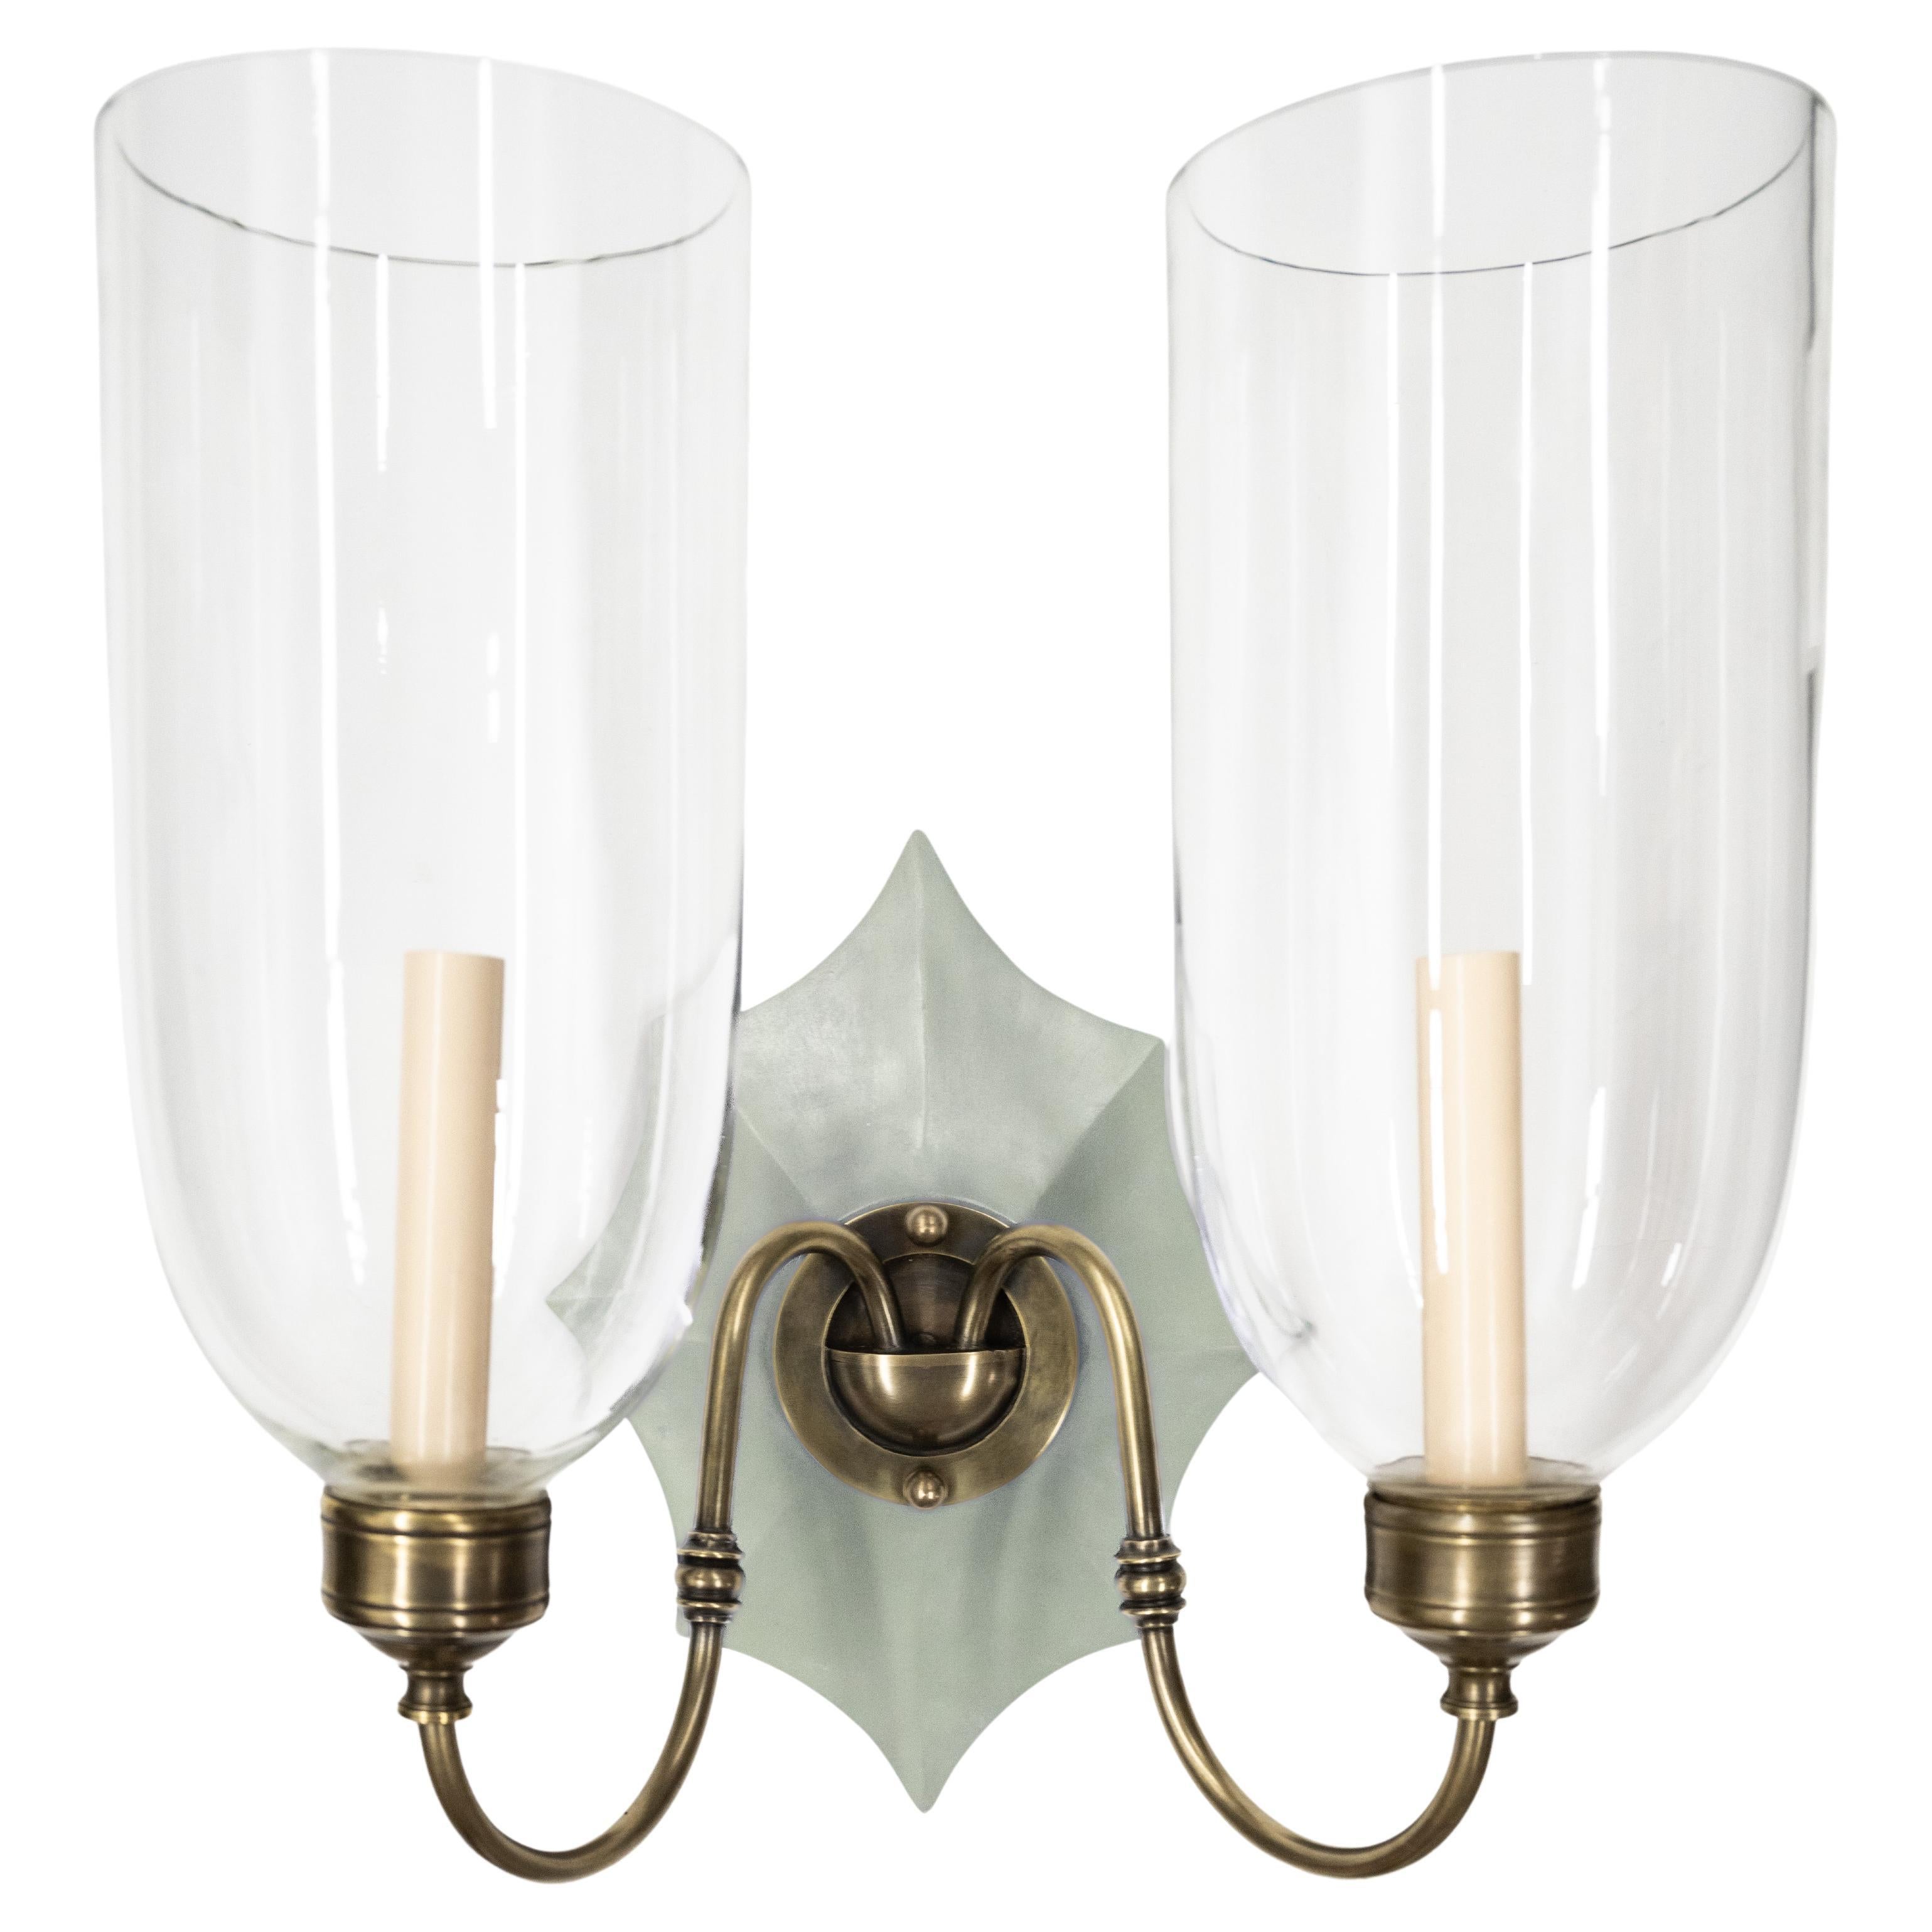 Hurricane Sconces with Double Kent-Style Arms